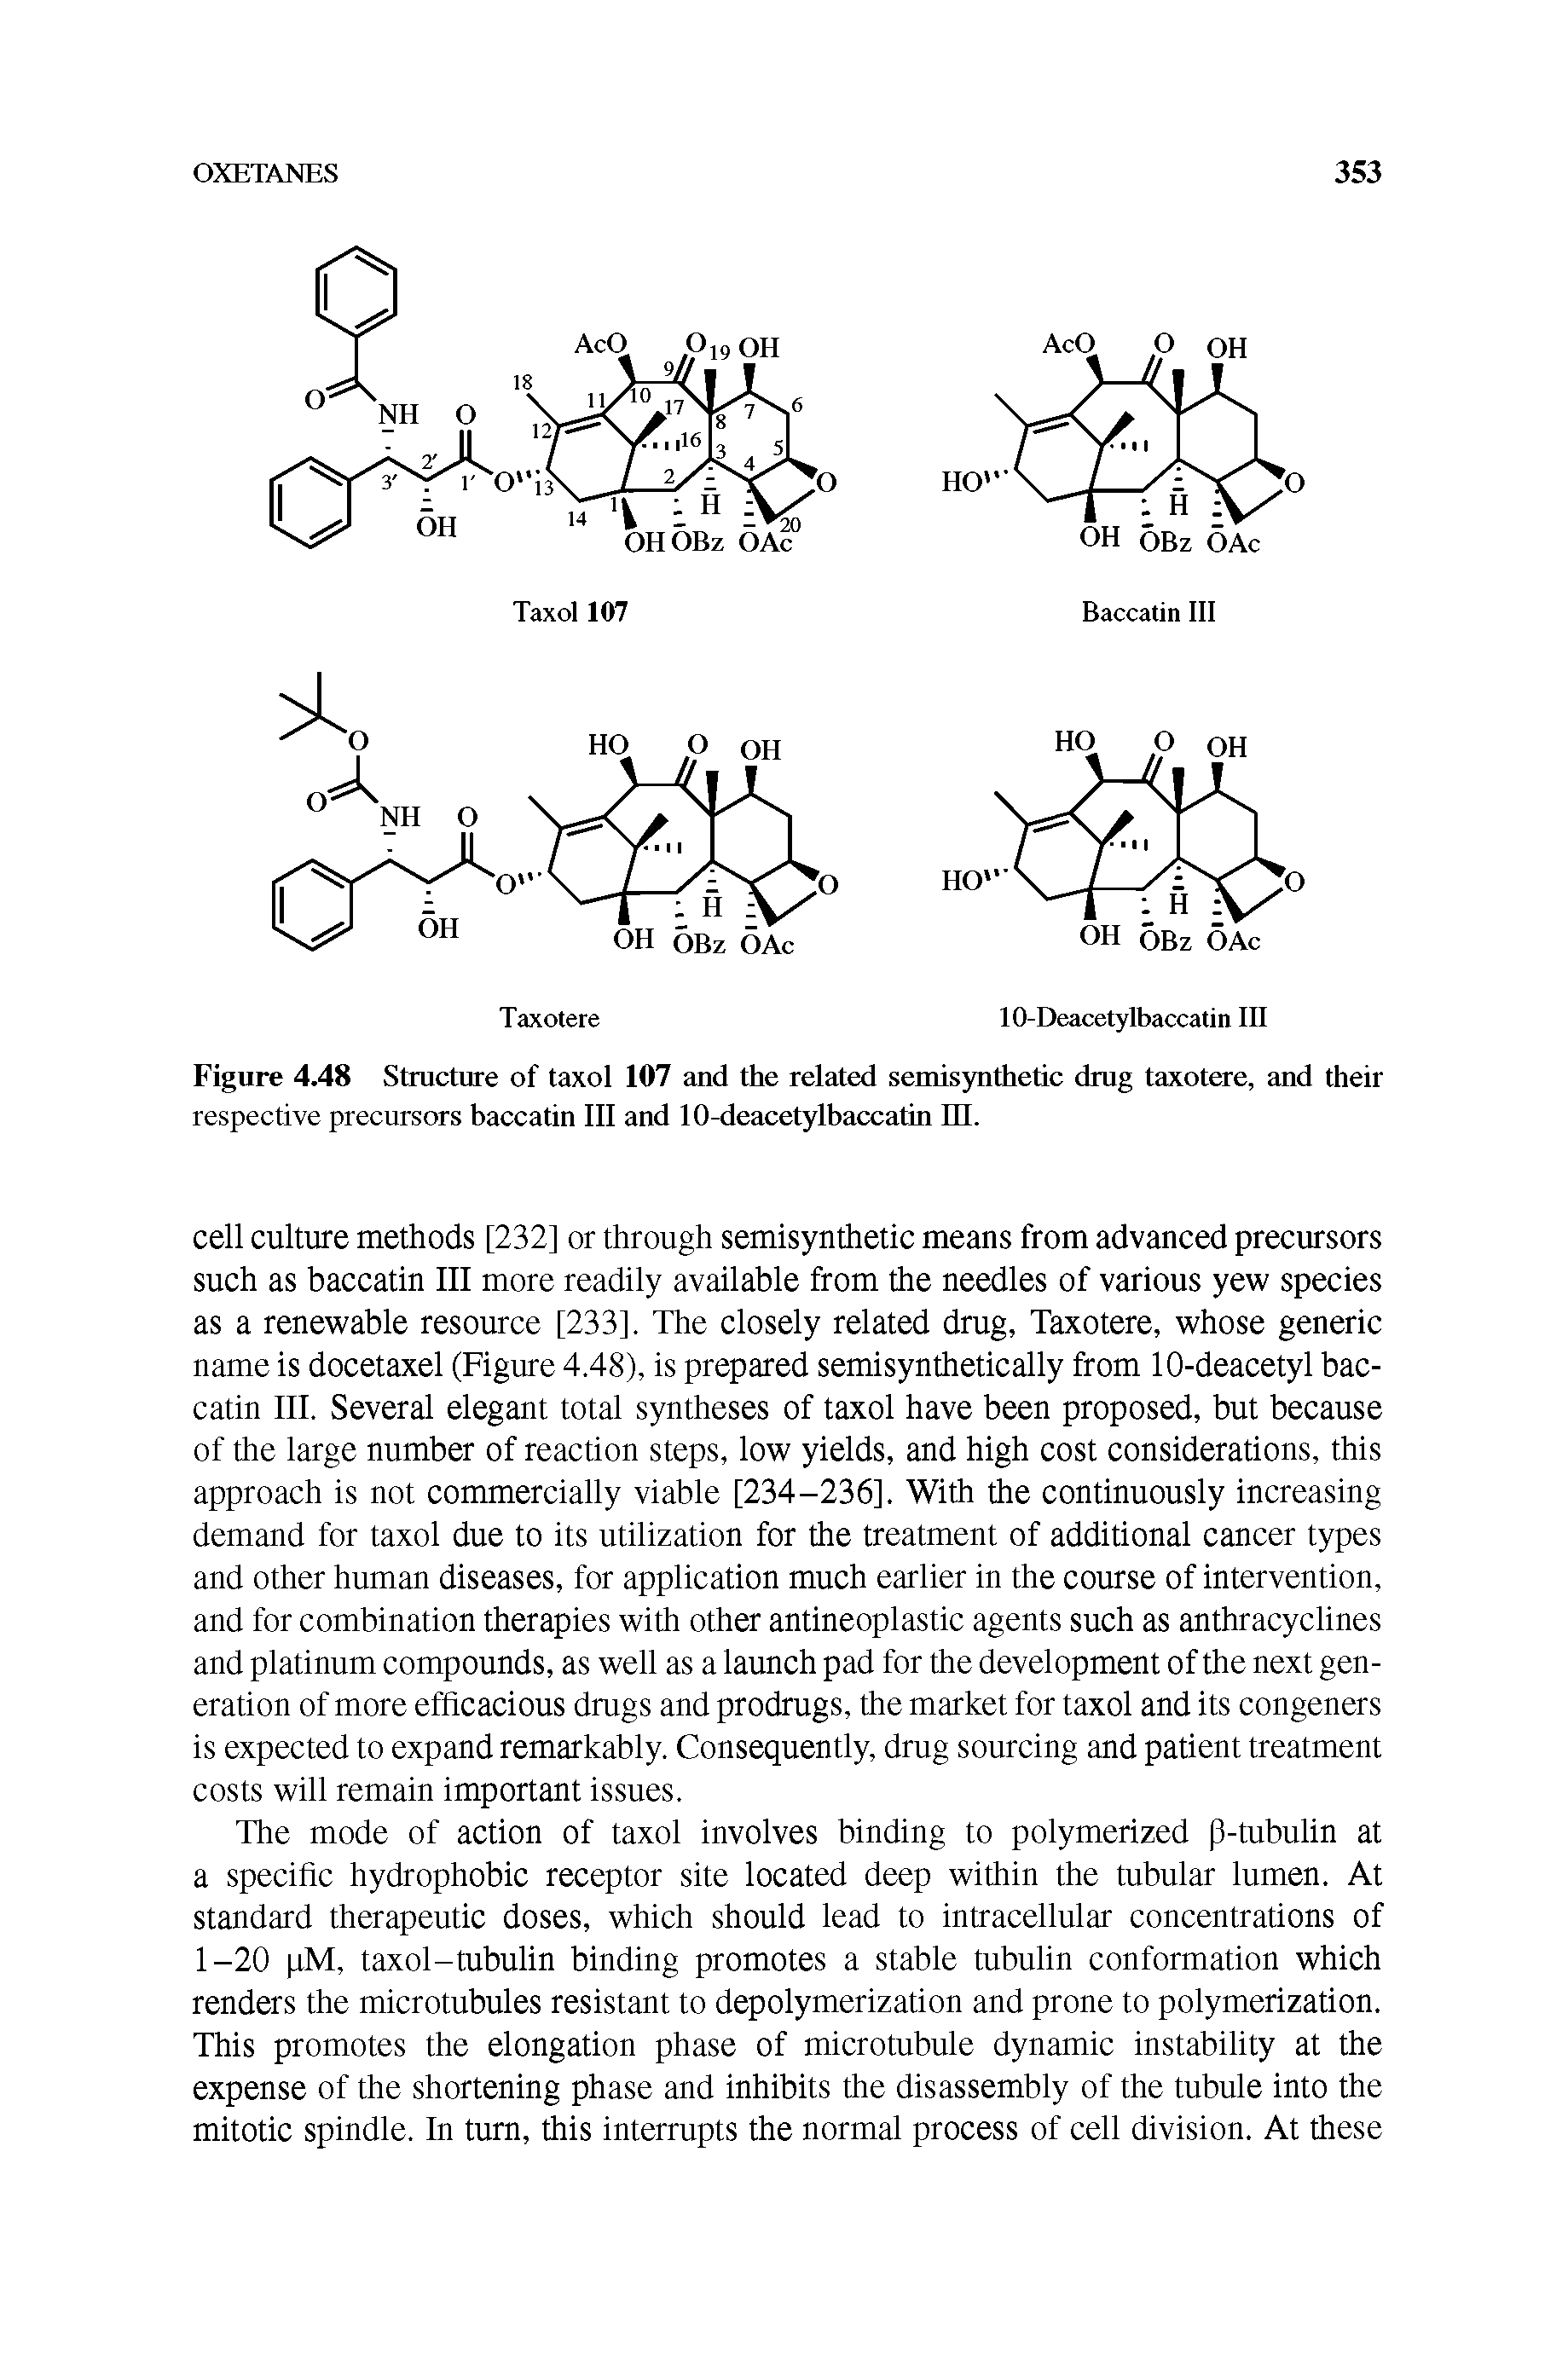 Figure 4 8 Structure of taxol 107 and the related semisynthetic drug taxotere, and their respective precursors haccatin III and 10-deacetylhaccatin HI.